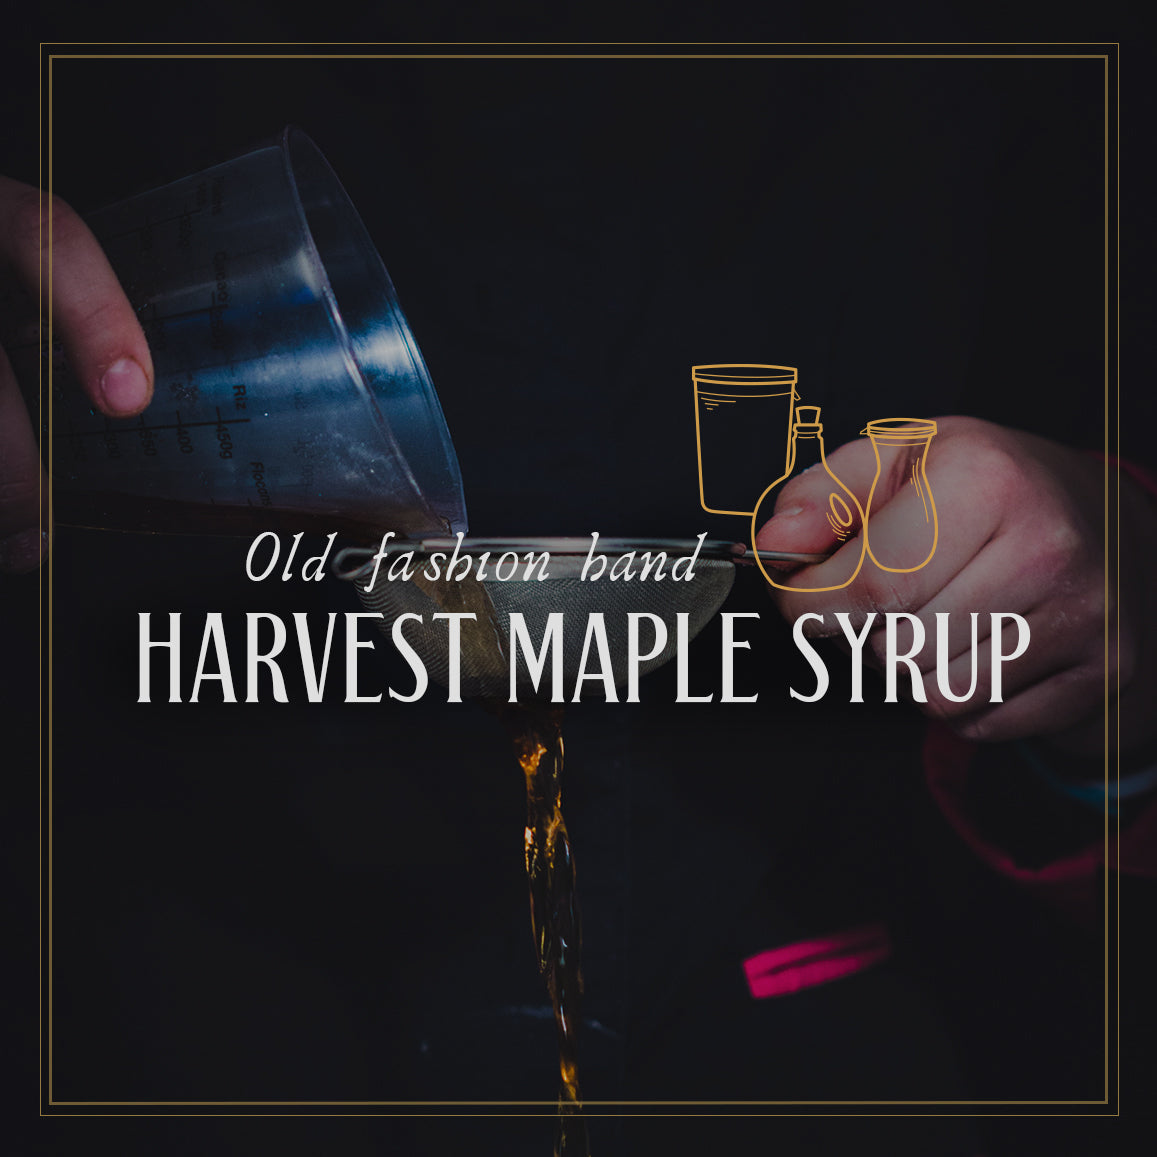 Old fashion hand harvest maple syrup